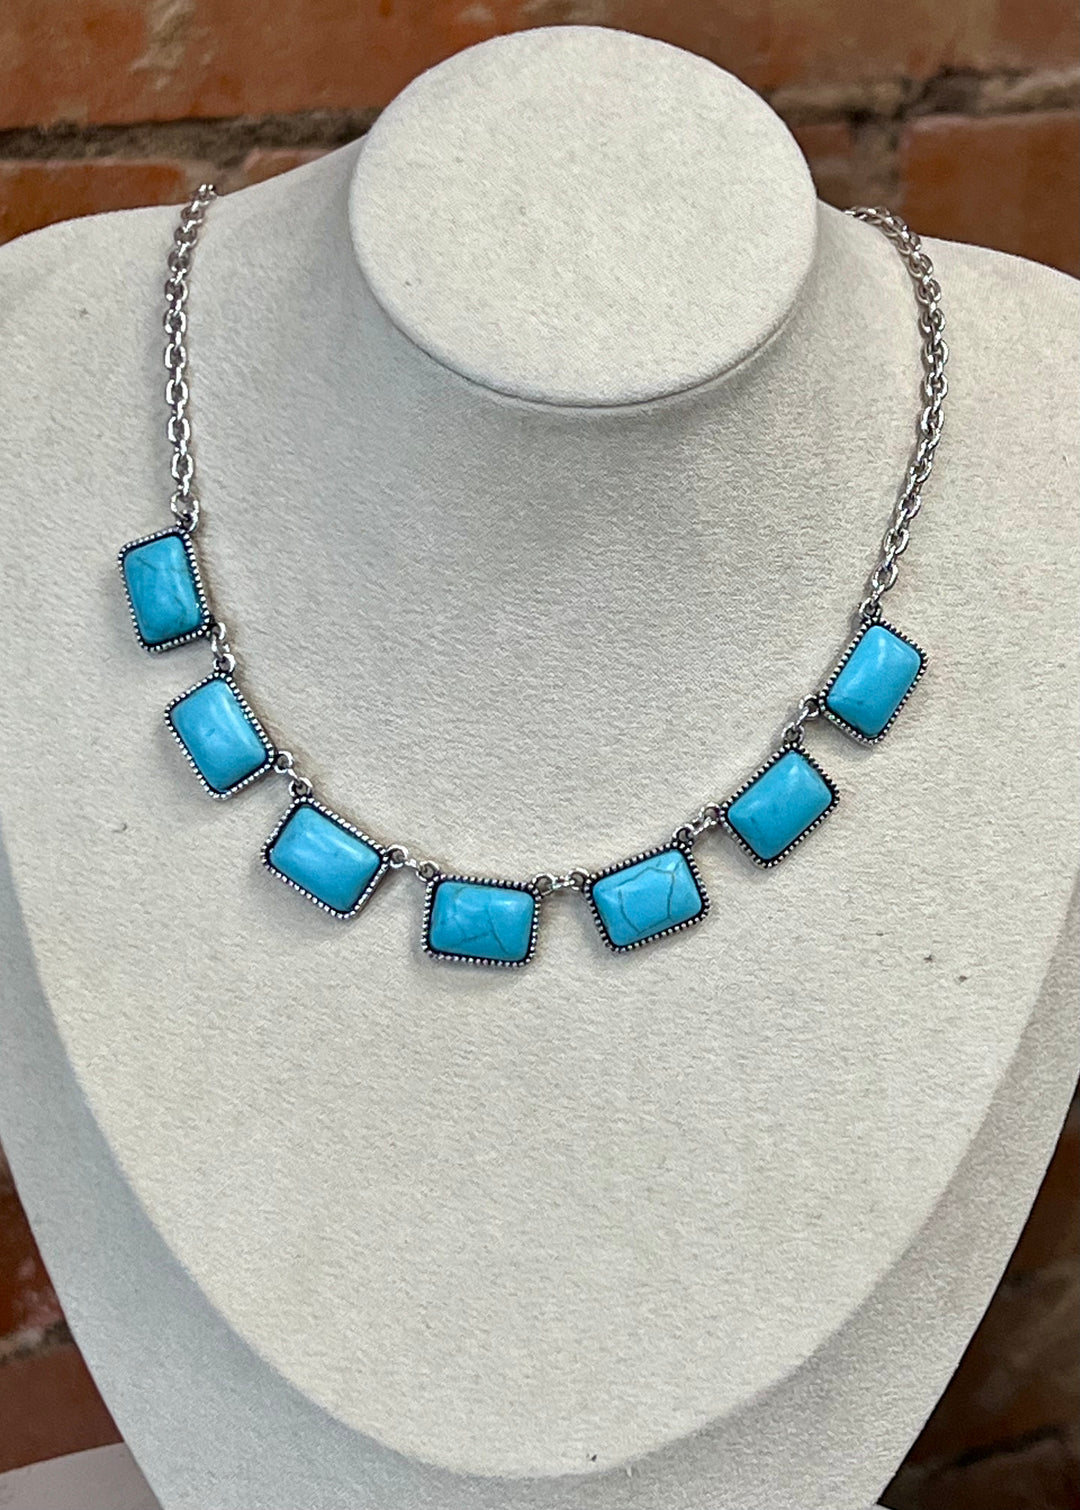 Silver Chain with Rectangle Turquoise Stone Necklace